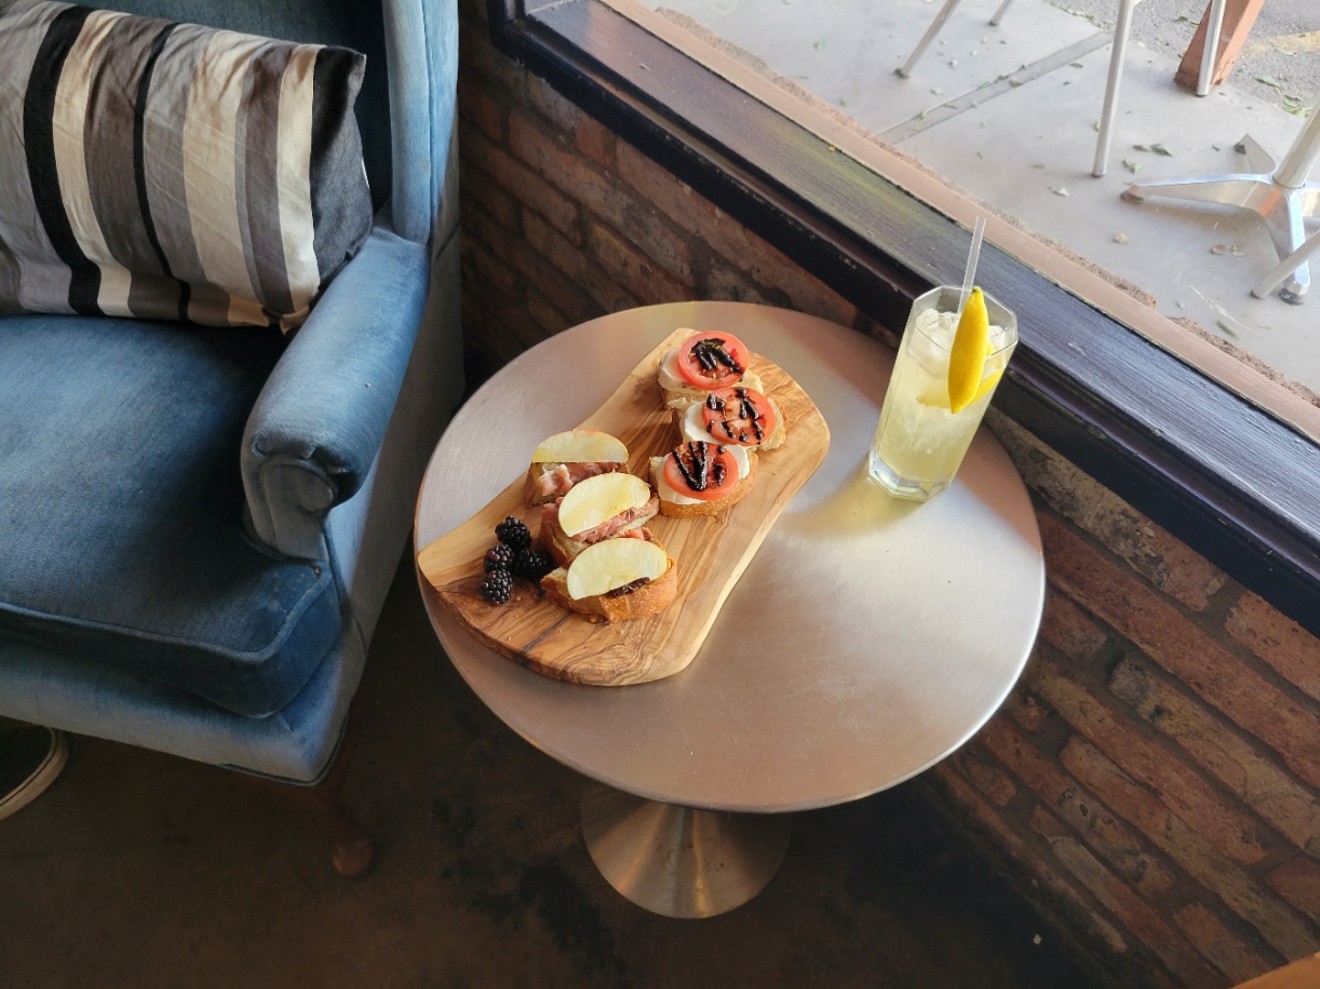 The Lounge at King Coffee serves cocktails and small plates, offering a "chill party vibe" that can be an alternative to the rowdy Mill Avenue bar scene in Tempe.